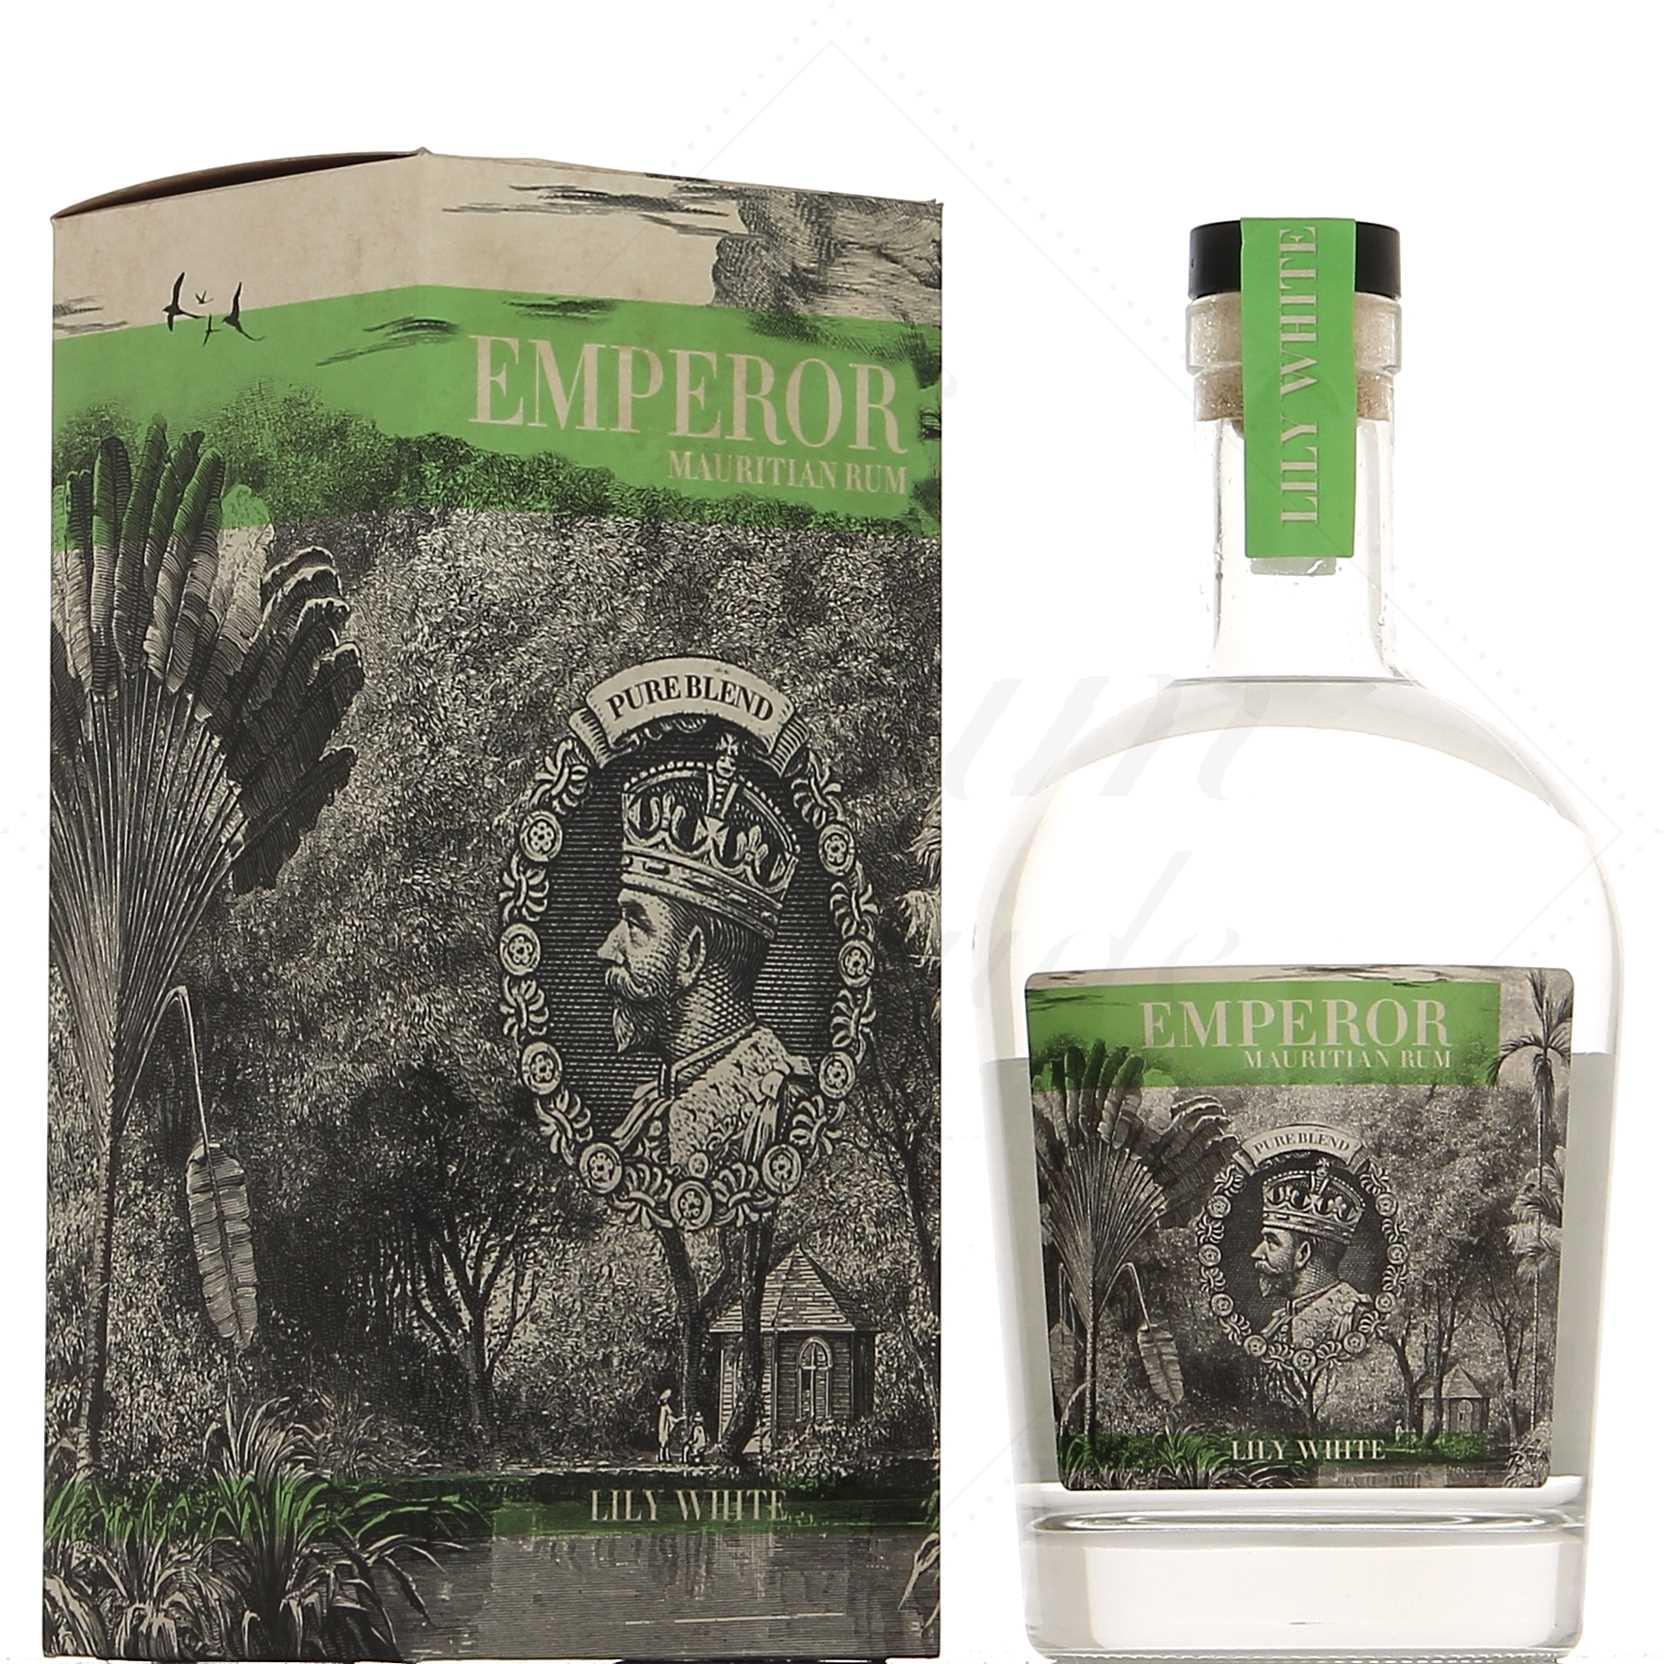 Emperor Lily White Mauritian Rum 700ml